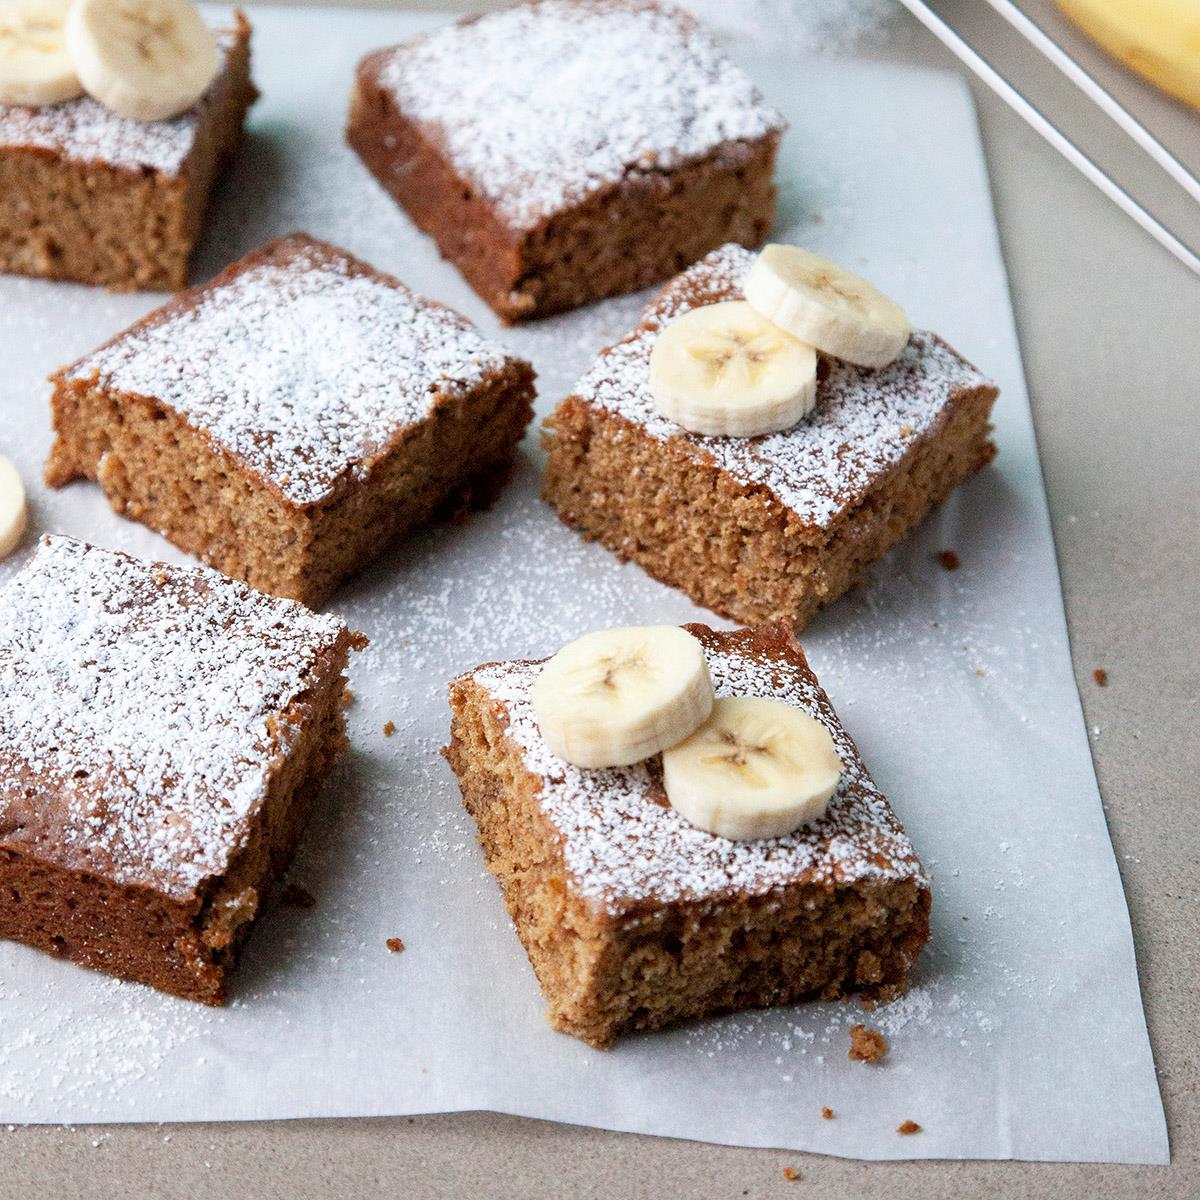 The 'Nothing Wasted' Banana Bread Recipe | Tesco Real Food